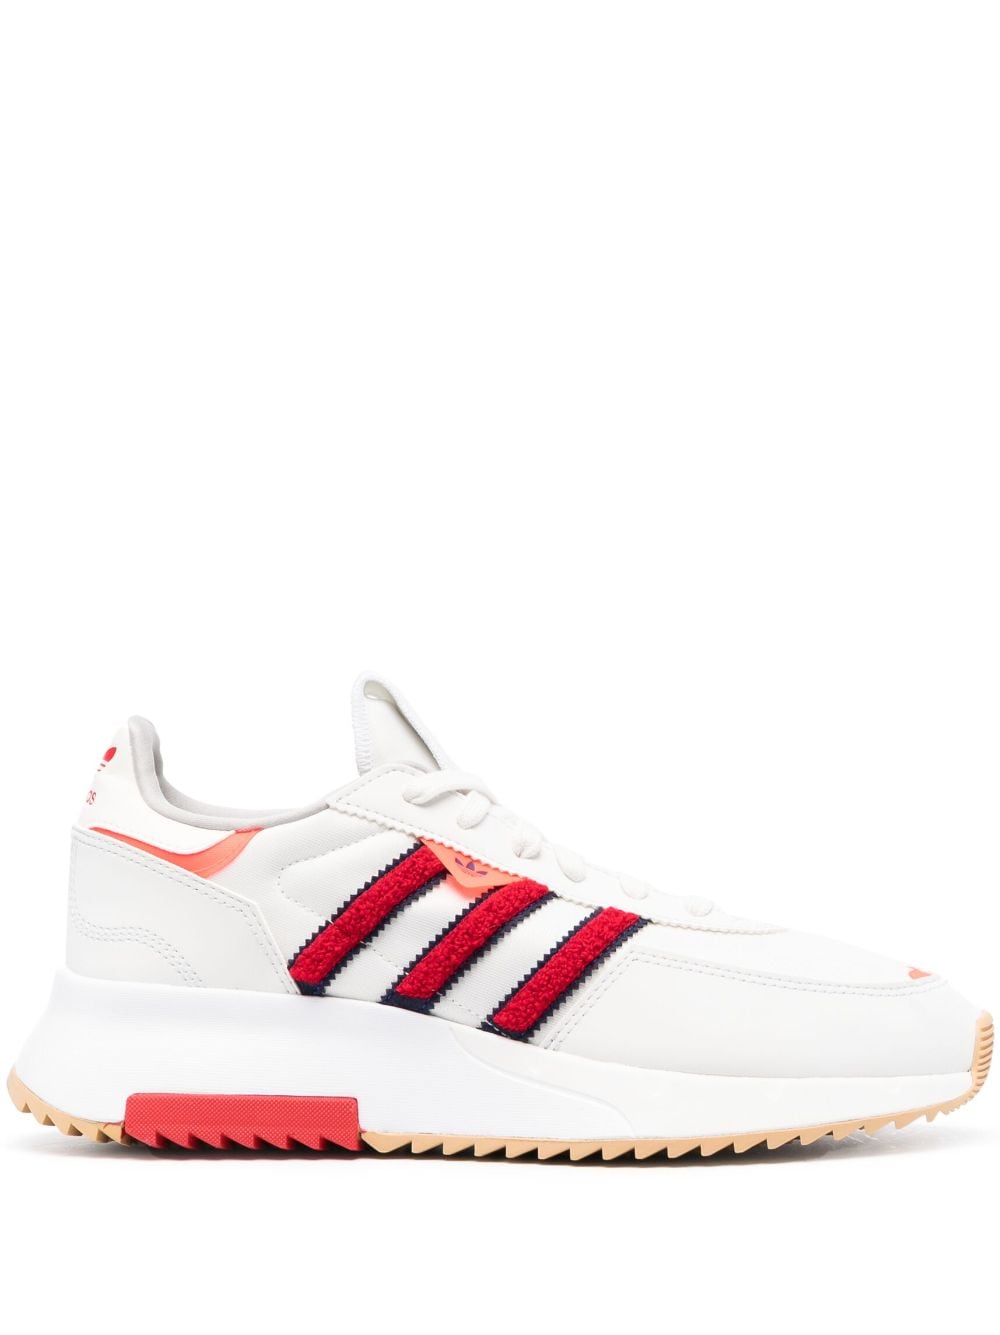 Adidas Originals 3-stripes Low-top Sneakers In White